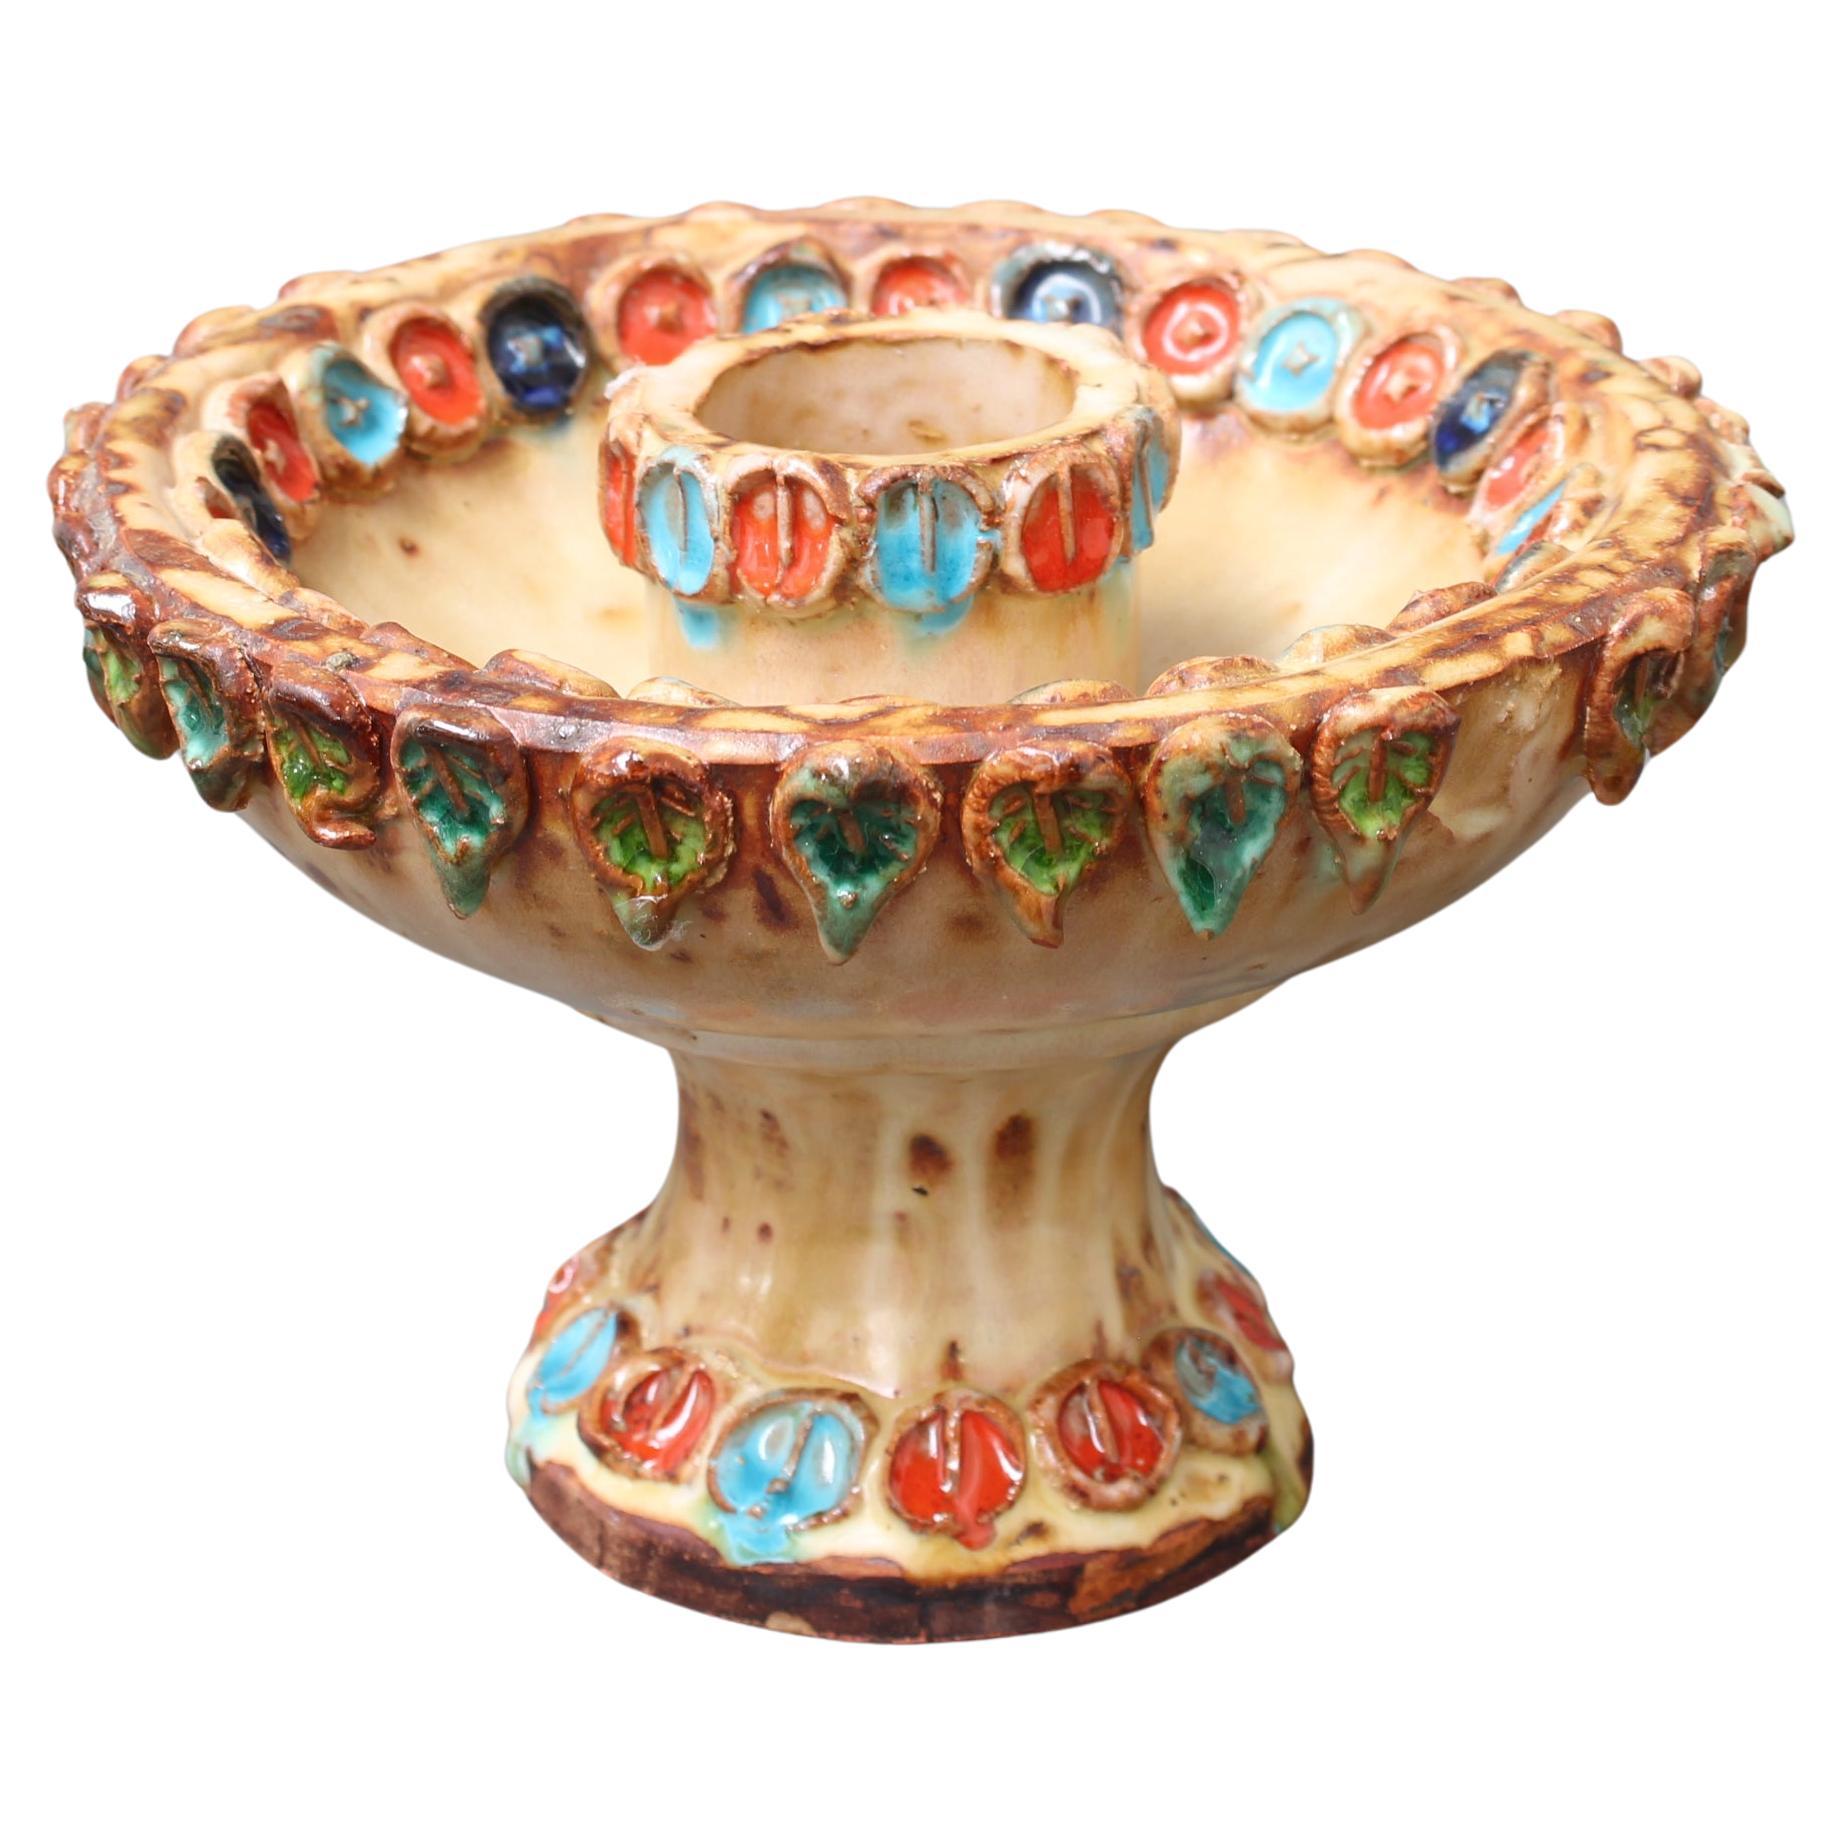 Vintage French Ceramic Candle-Holder by La Roue (circa 1960s)